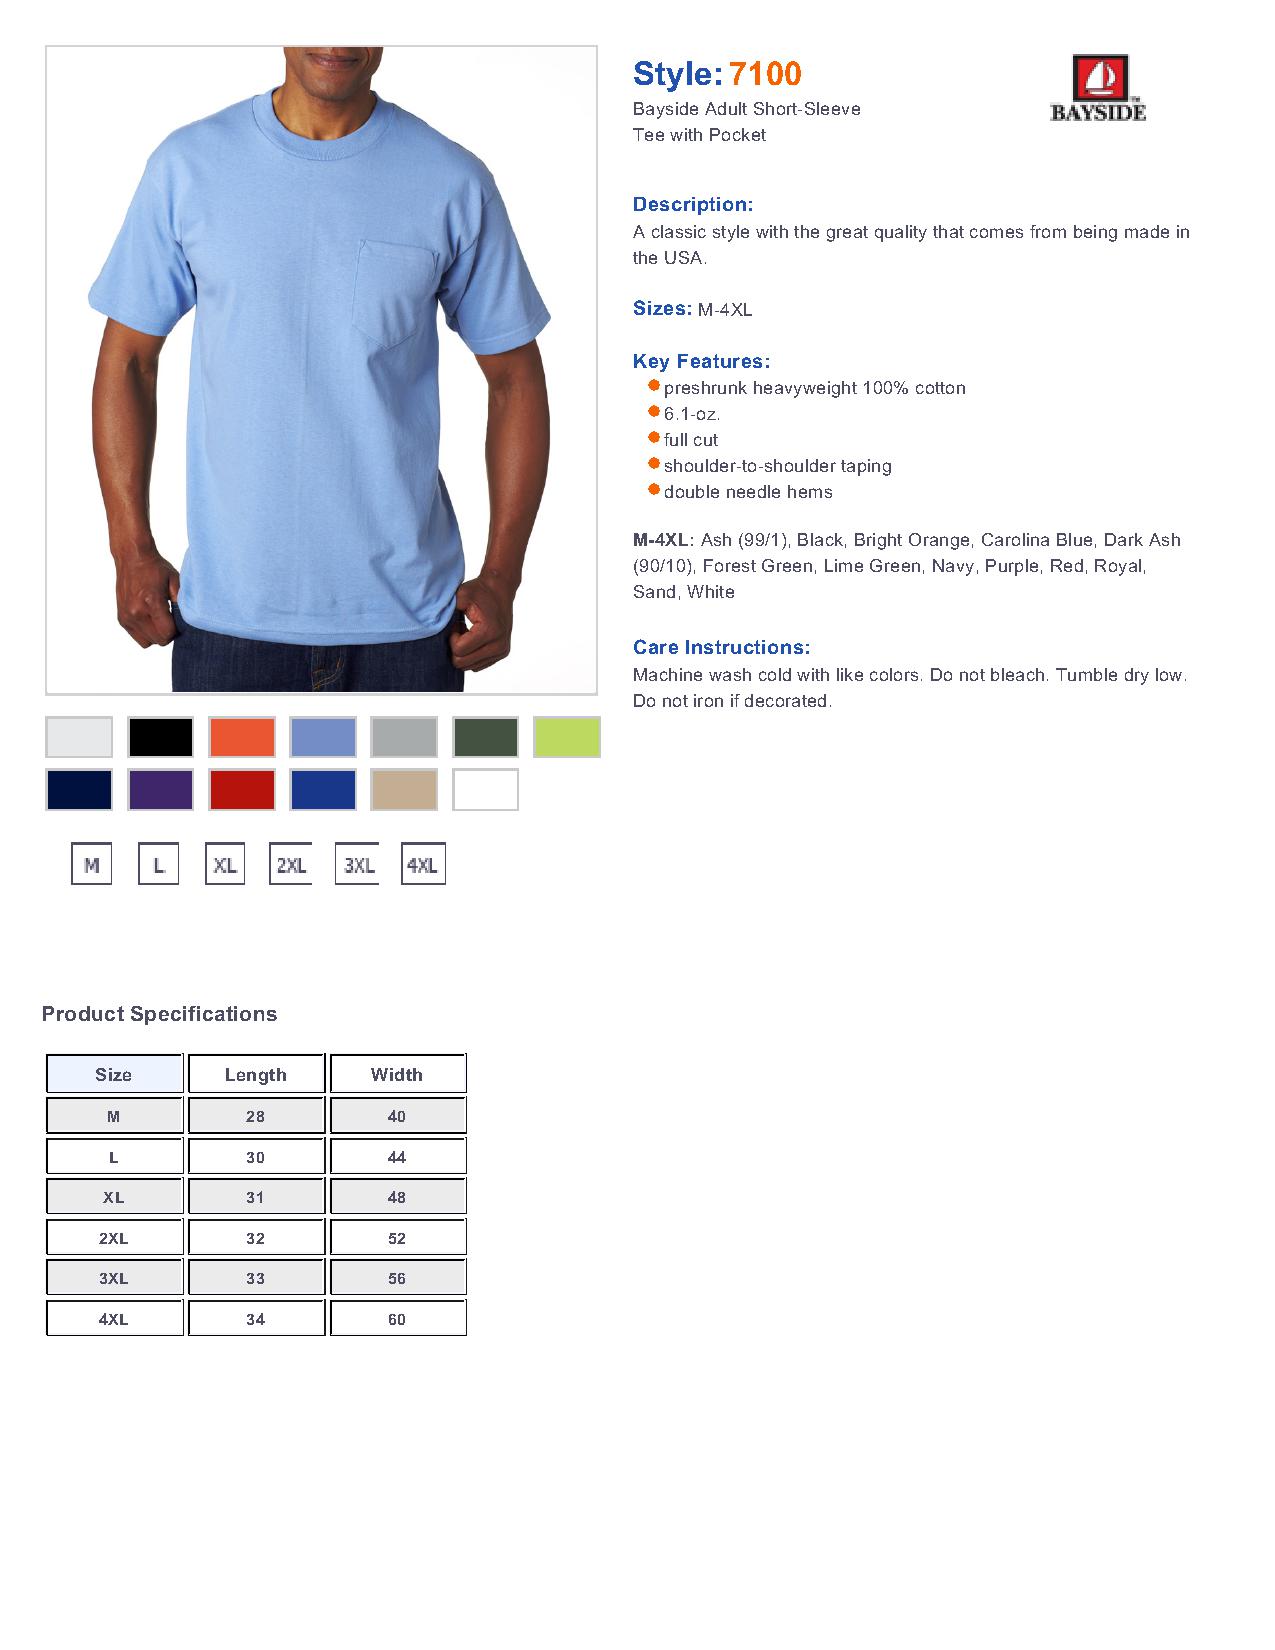 Bayside 7100 Short Sleeve T-Shirt with a Pocket $11.24 - T-Shirts